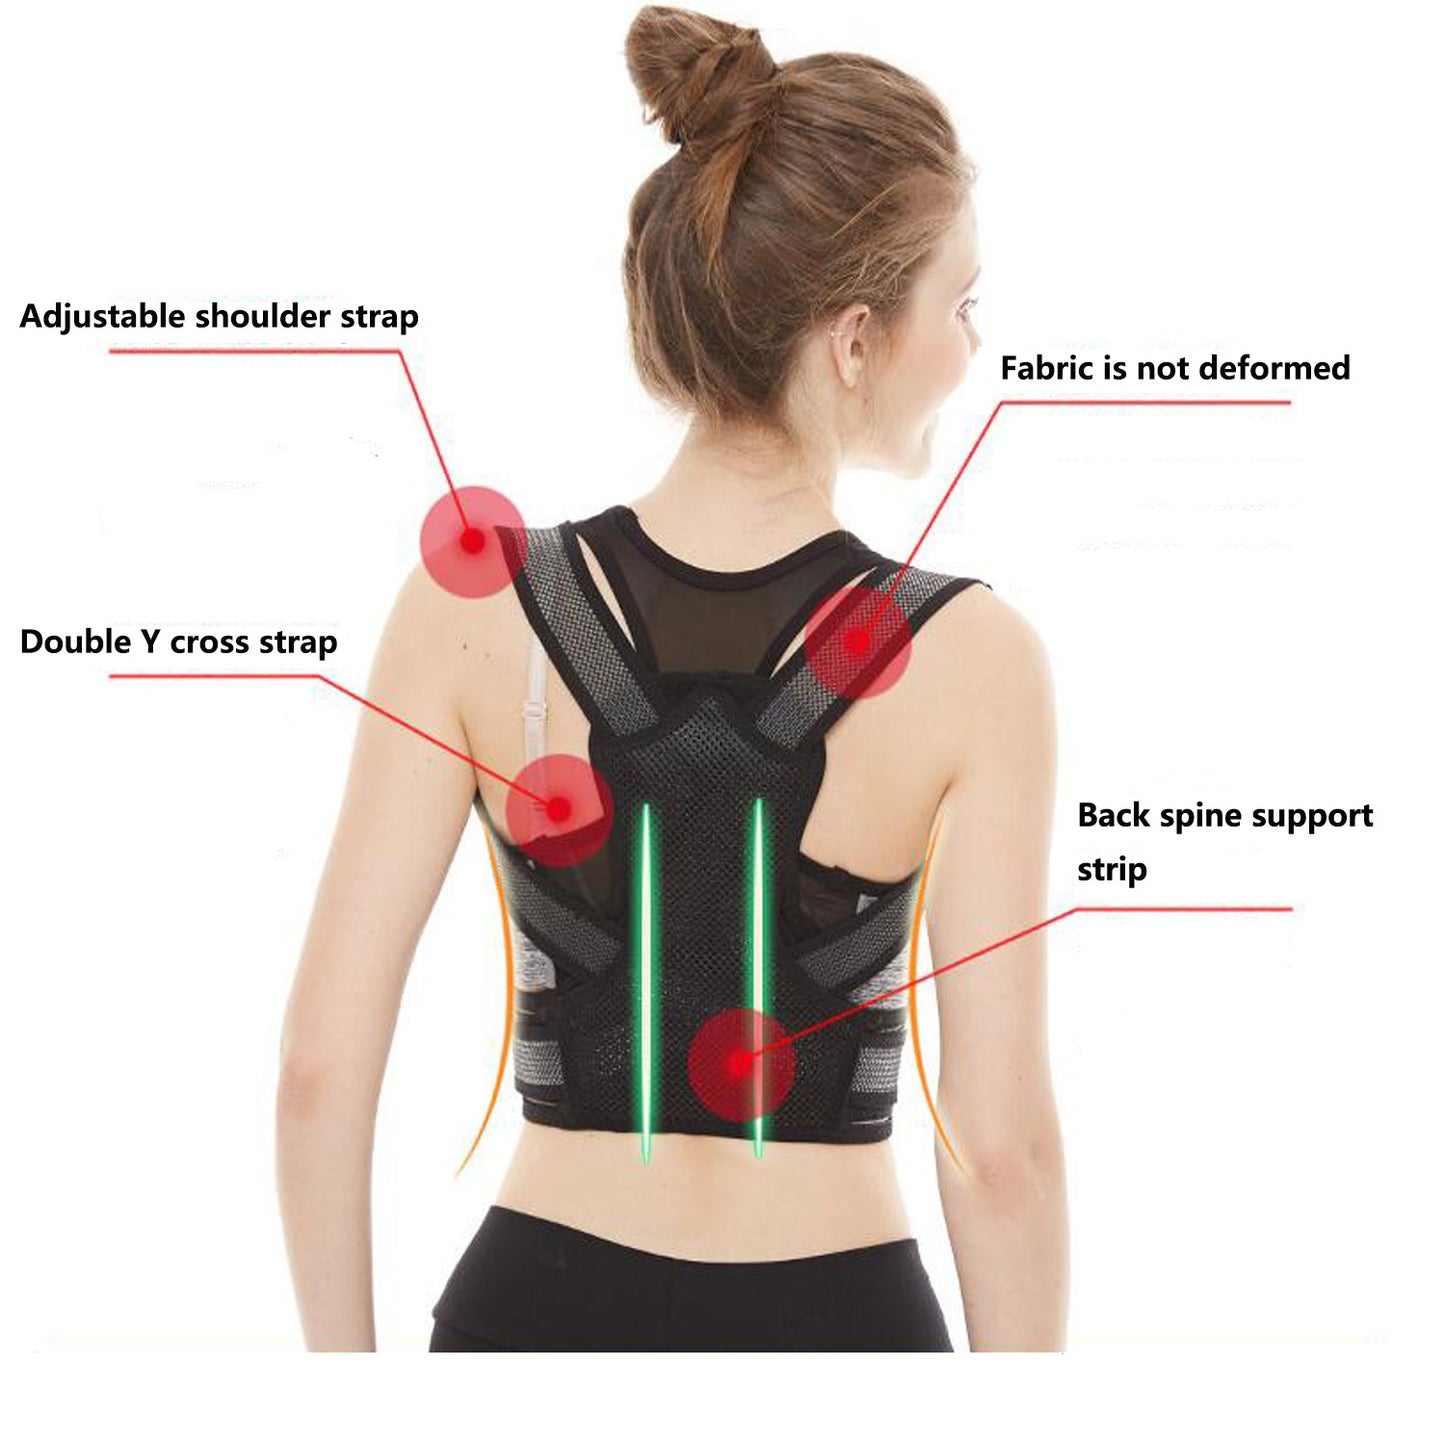 ZSZBACE Back brace, Scoliosis Humpback Correction Belt, Adjustable Comfort Invisible for Man Woman Adult Students Children